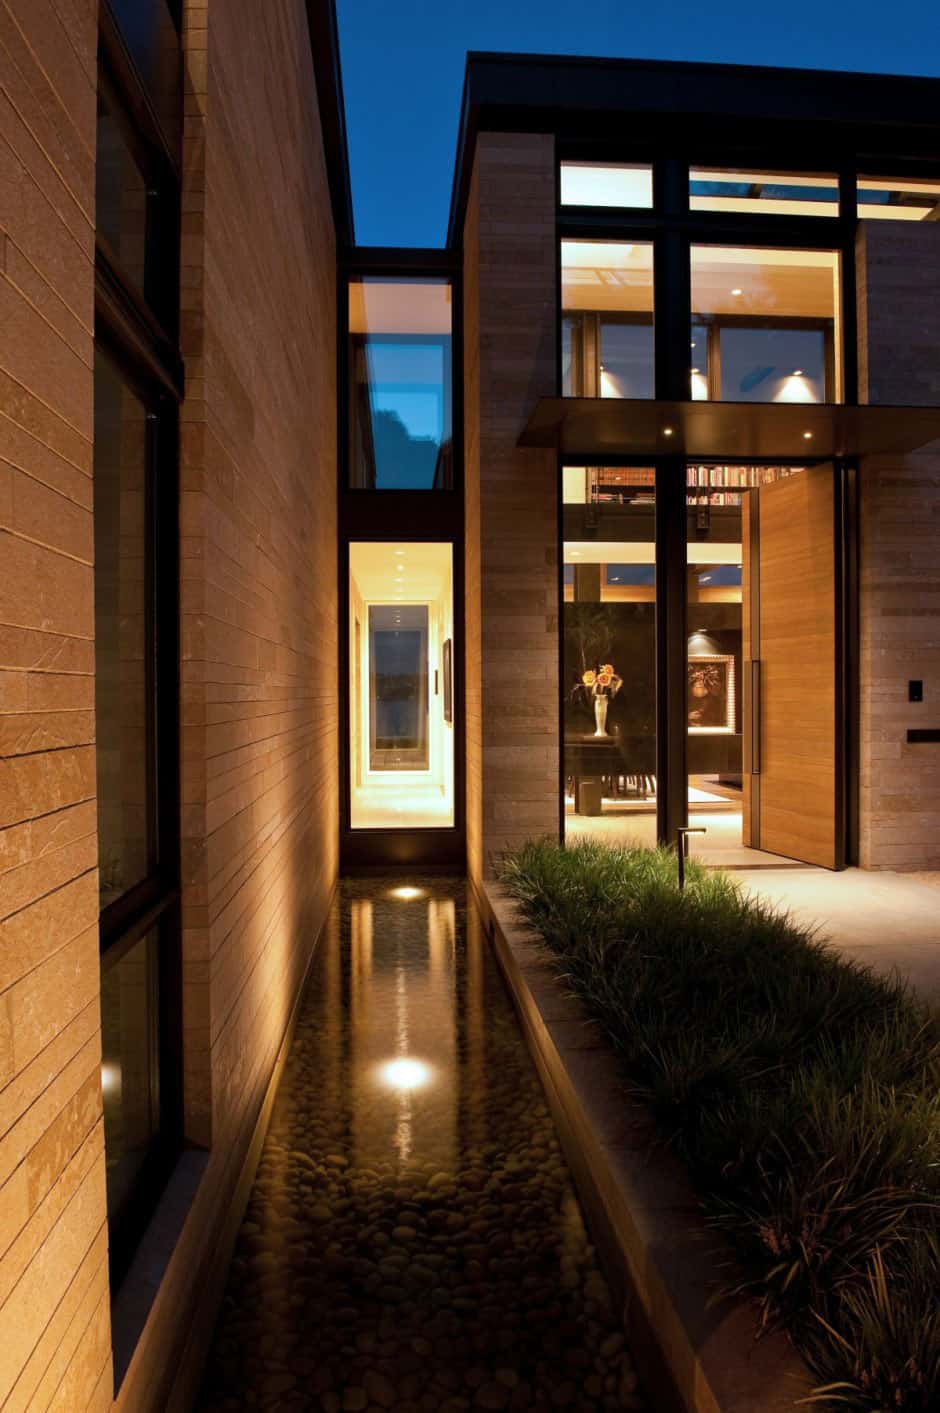 h-house-inspired-by-water-inside-and-out-8.jpg